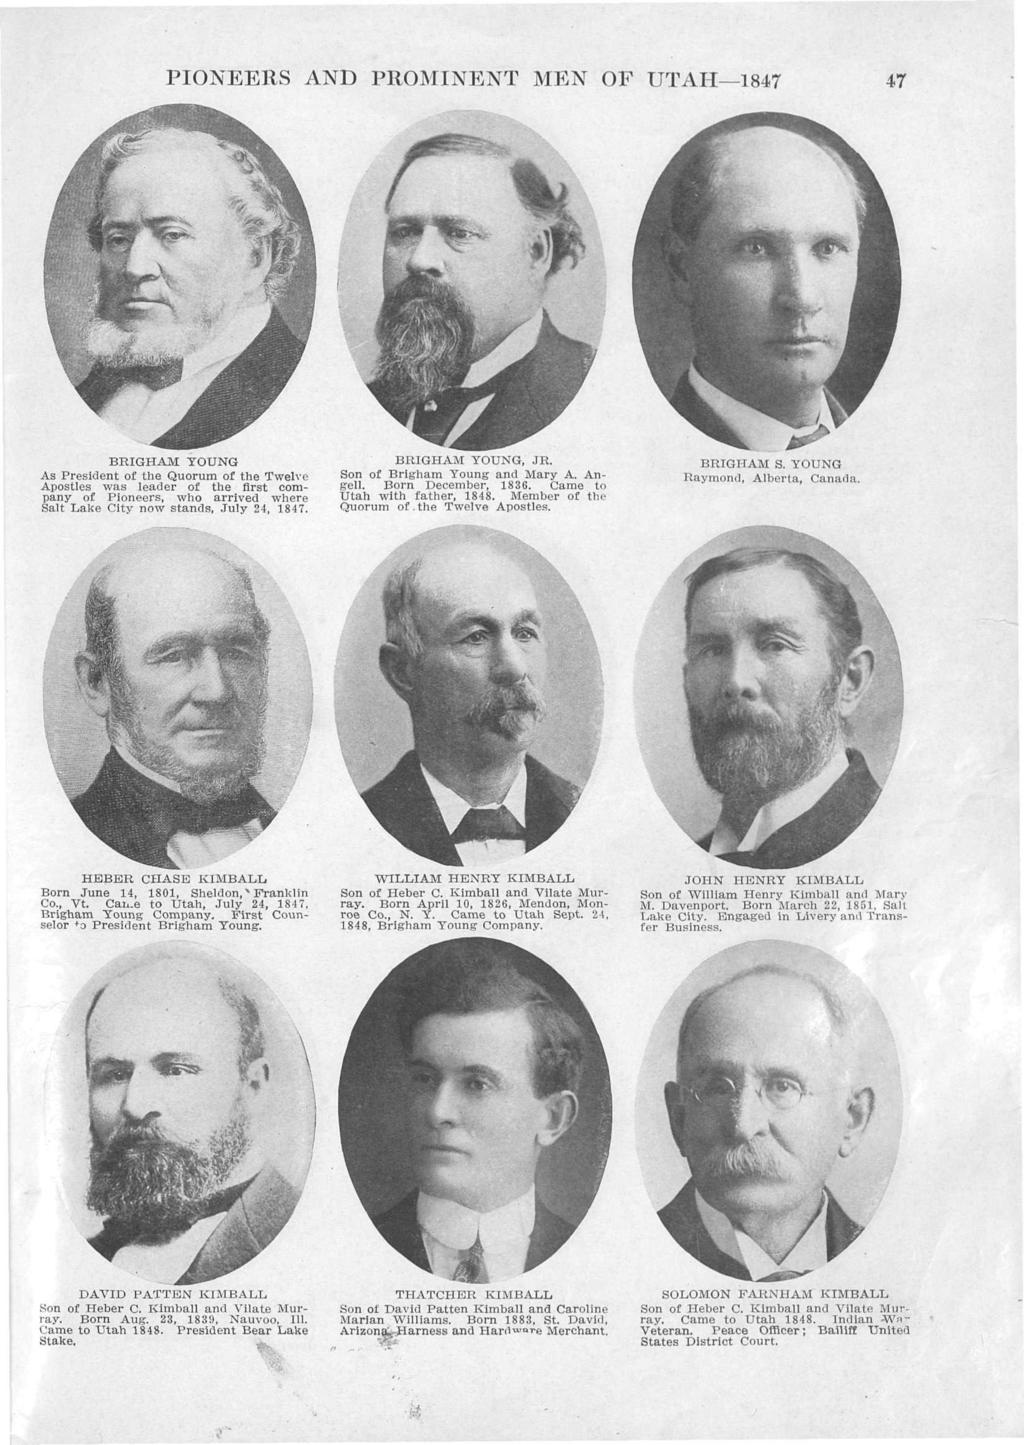 Pioneers and Prominent Men of Utah (Frank Esshom, 1913) 5,894 photos Start: PDF with (poor) OCR Auto extract photos (3x3 grid)